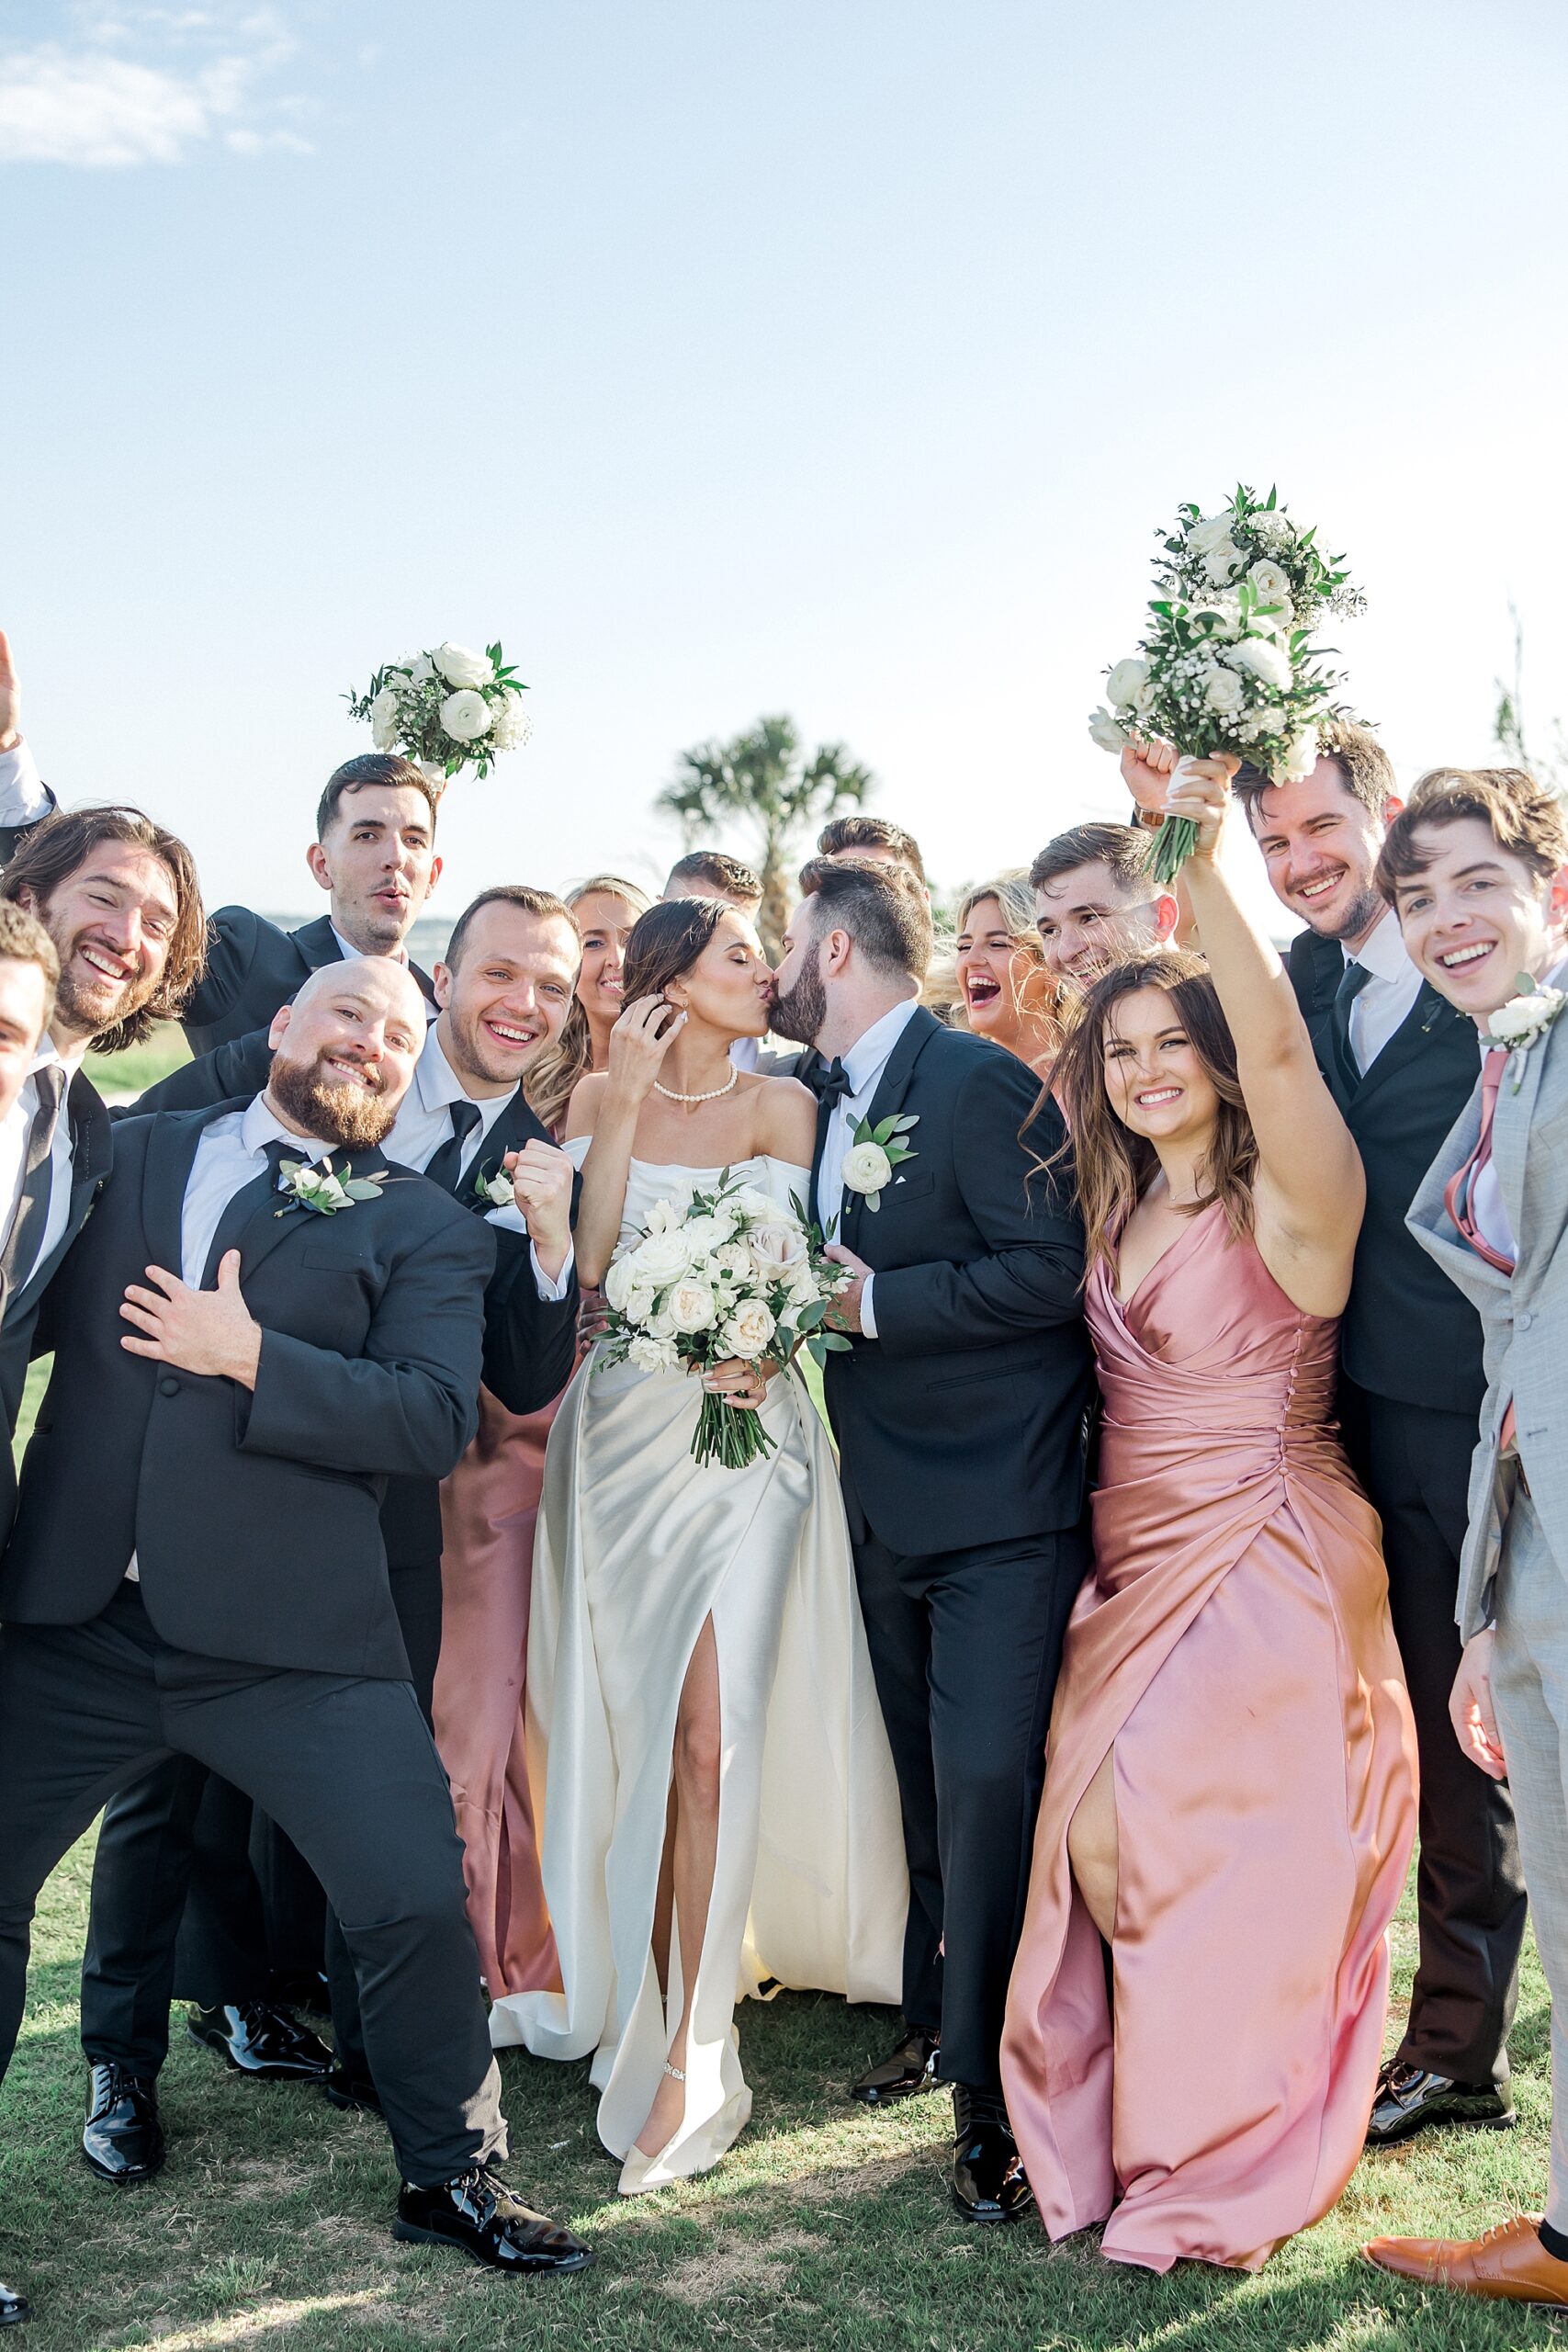 newlyweds kiss with wedding party surrounding them